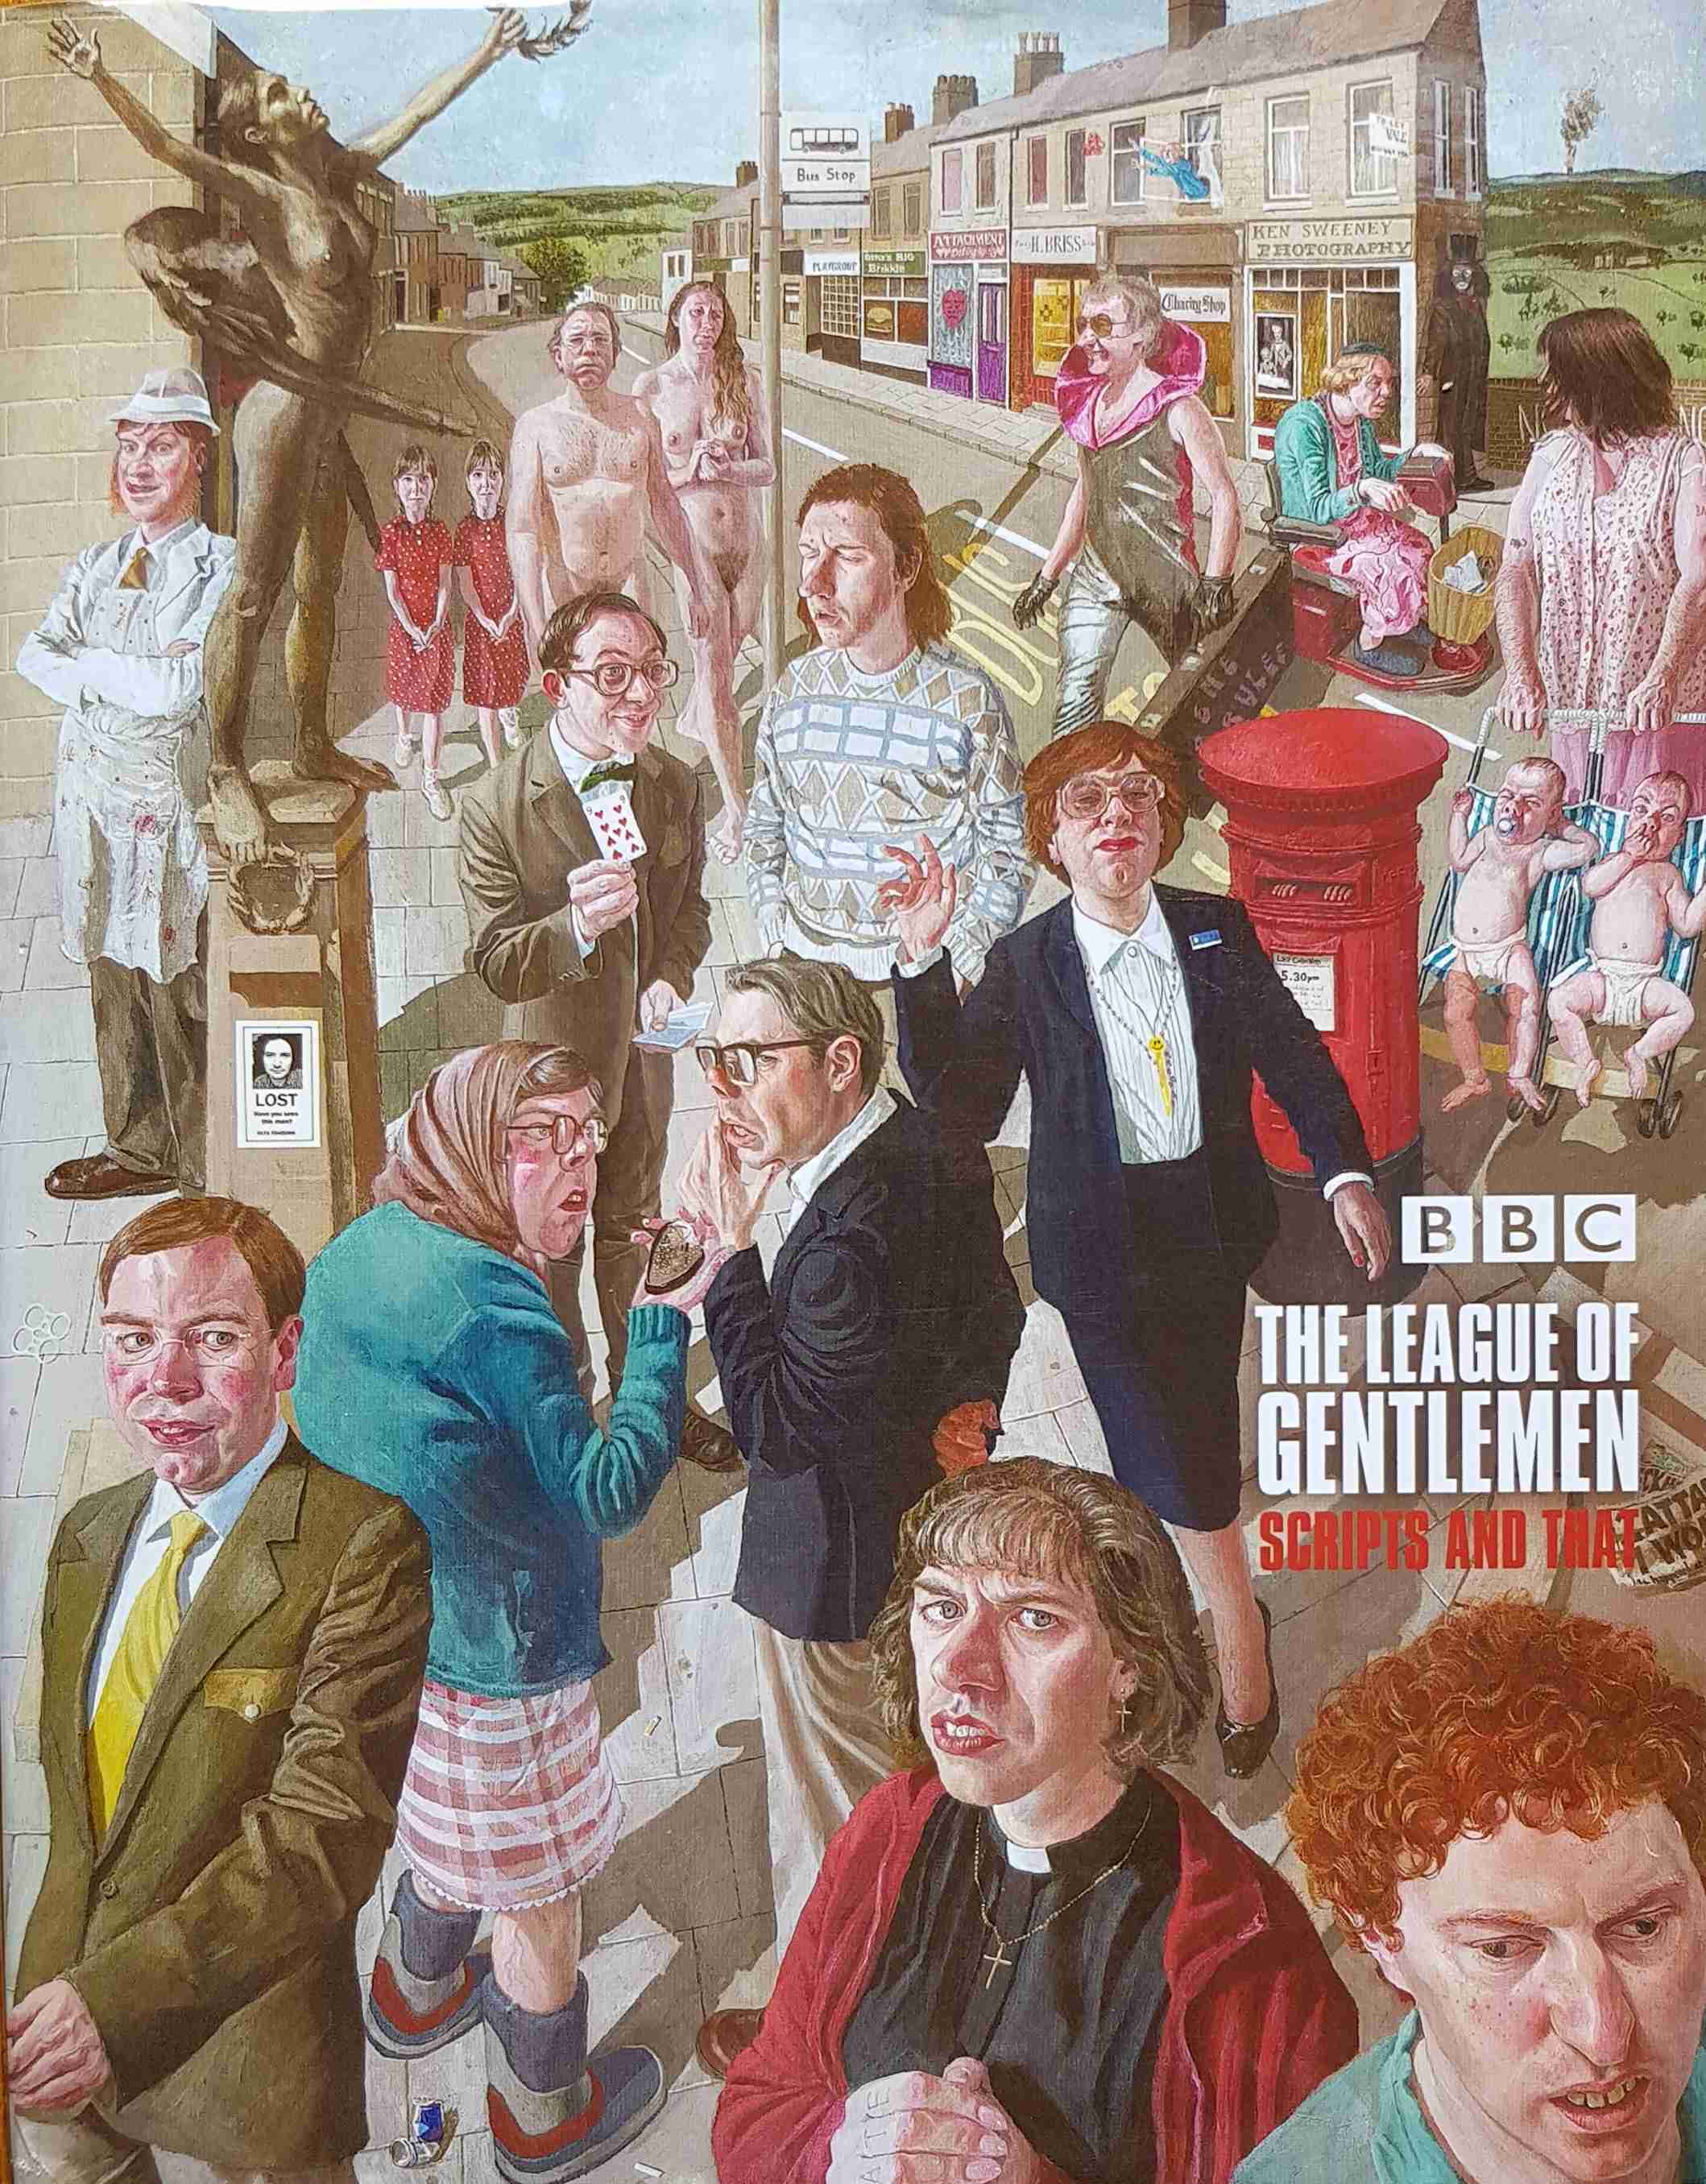 Picture of 0-563-48775-5 The league of gentlemen - Scripts and that by artist Jeremy Dyson / Mark Gatiss / Steve Pemberton / Reece Shearsmith from the BBC books - Records and Tapes library